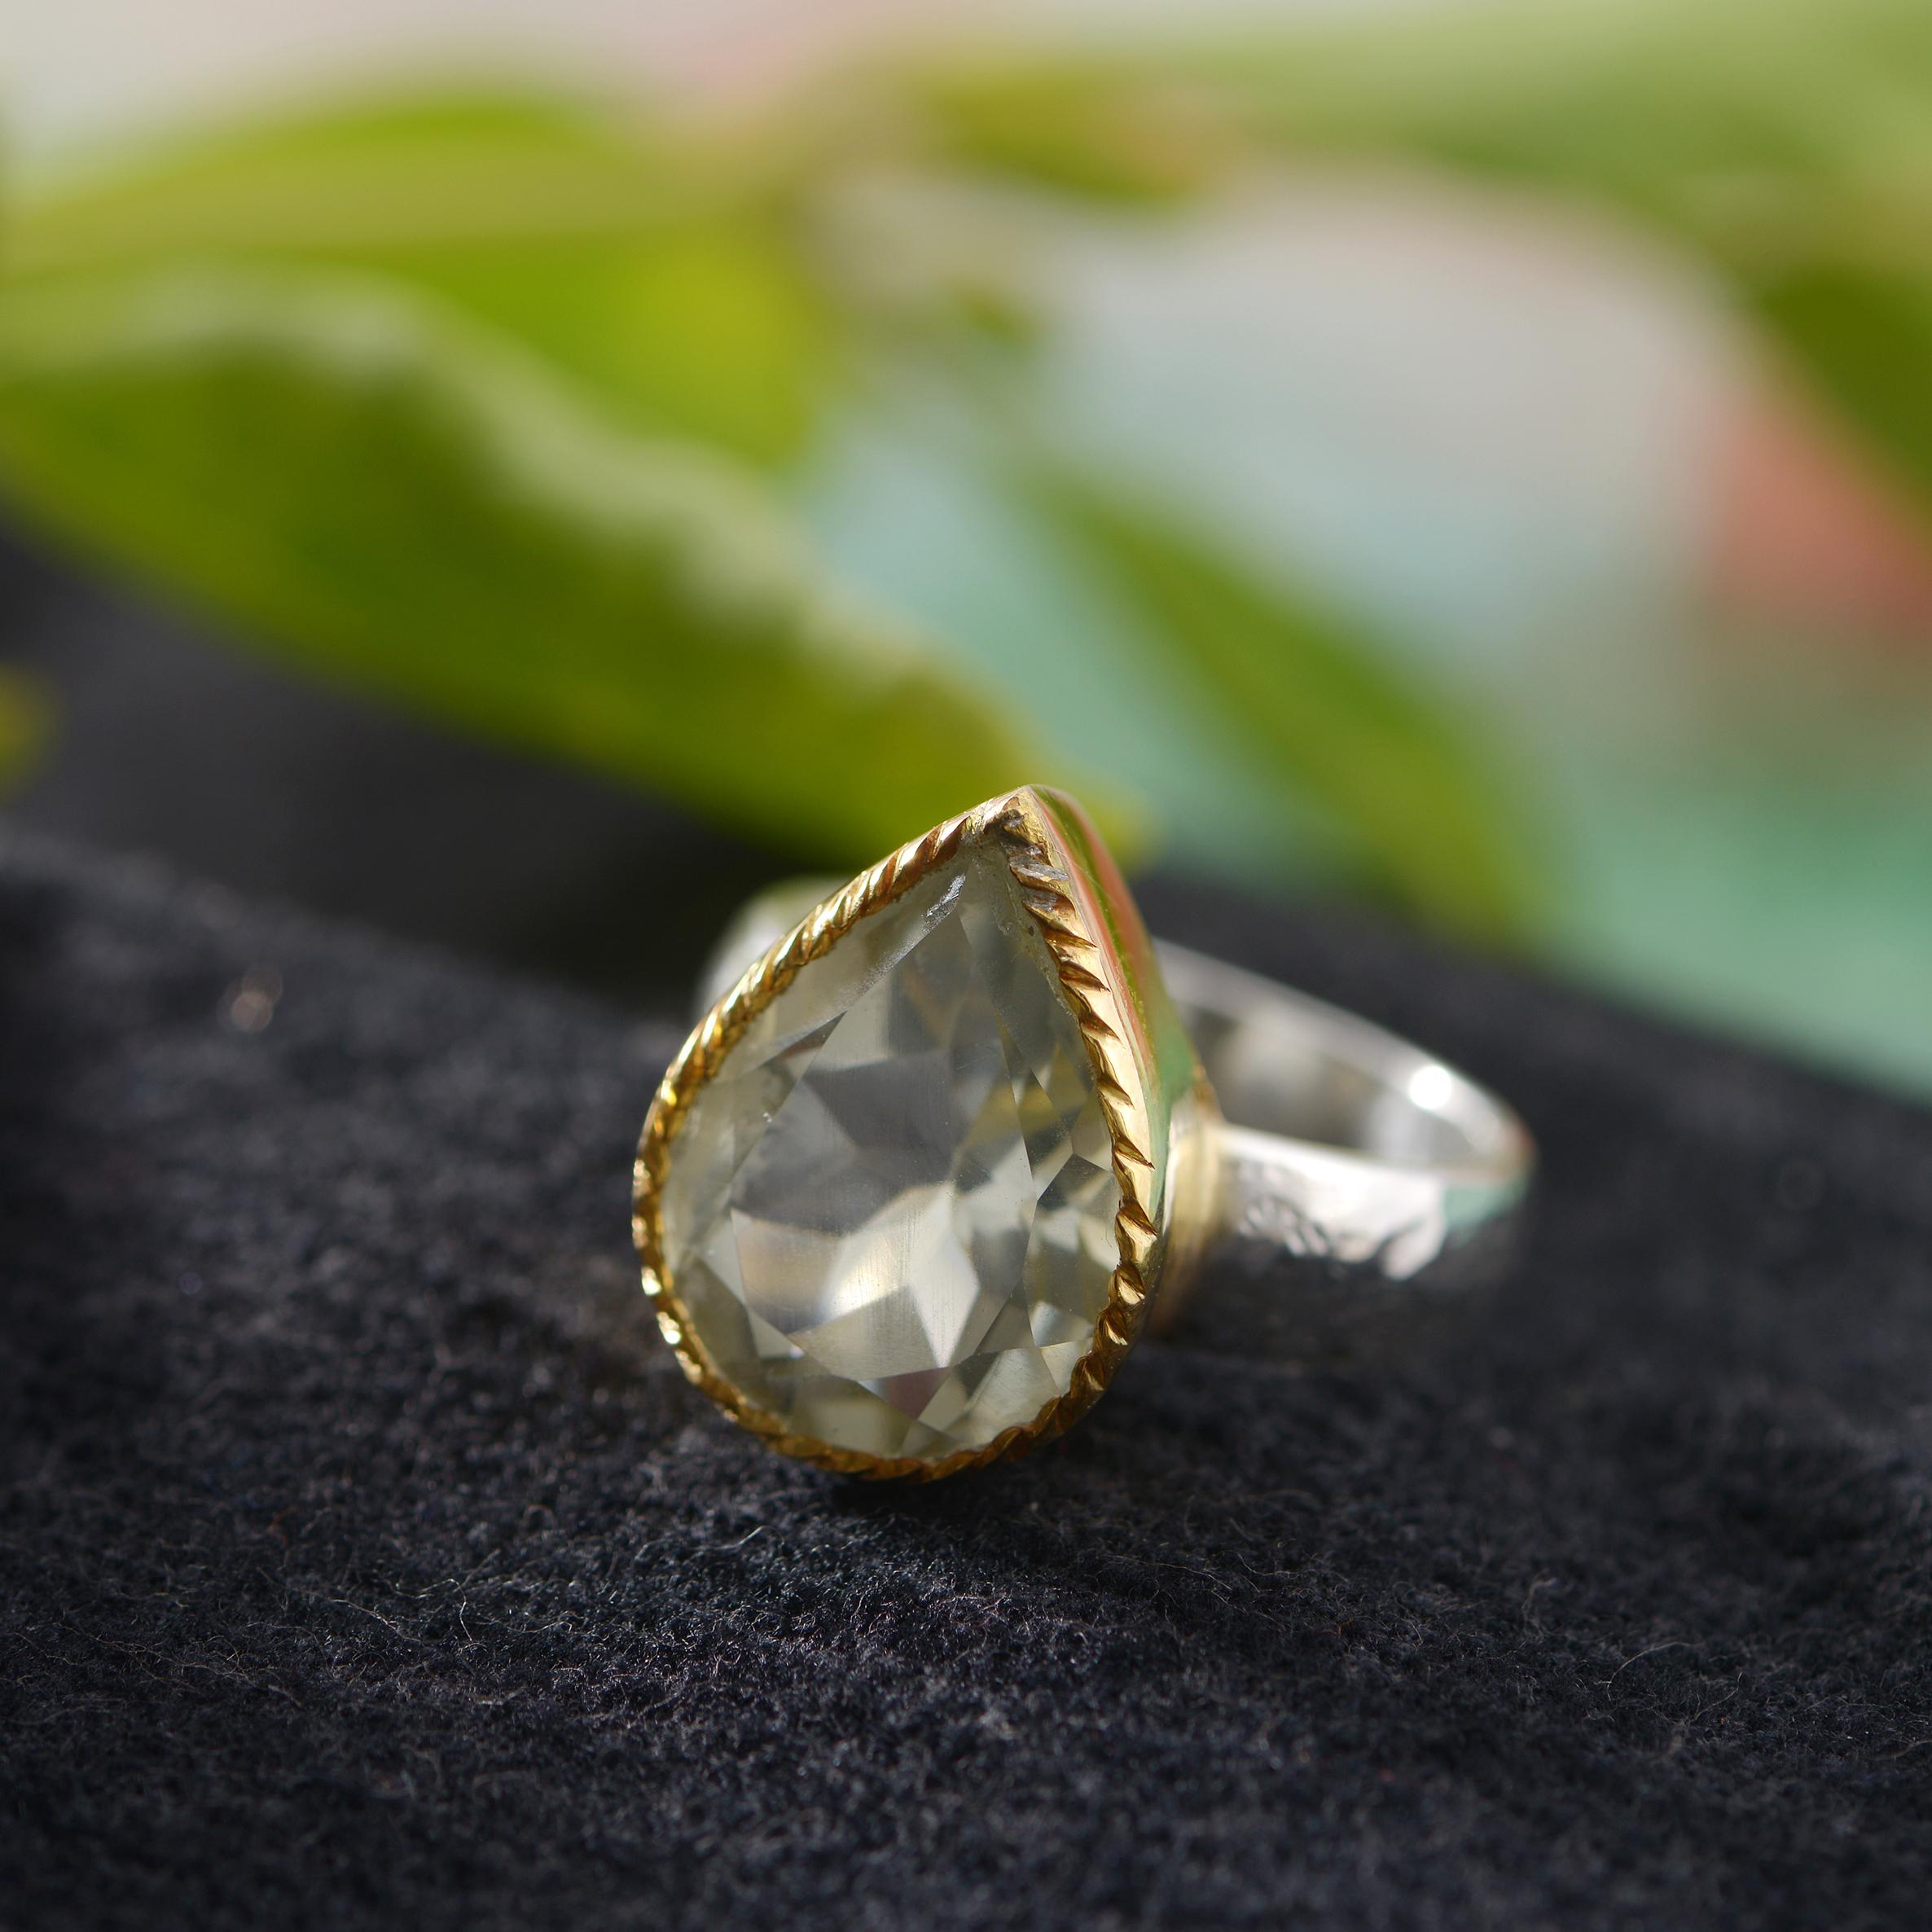 A lovely limited edition pear shaped handmade green amethyst ring.

The ring is part of a limited edition and has matching earrings and pendant. It is made in sterling silver with a hammered shank and the top of the ring is coated in 24k gold